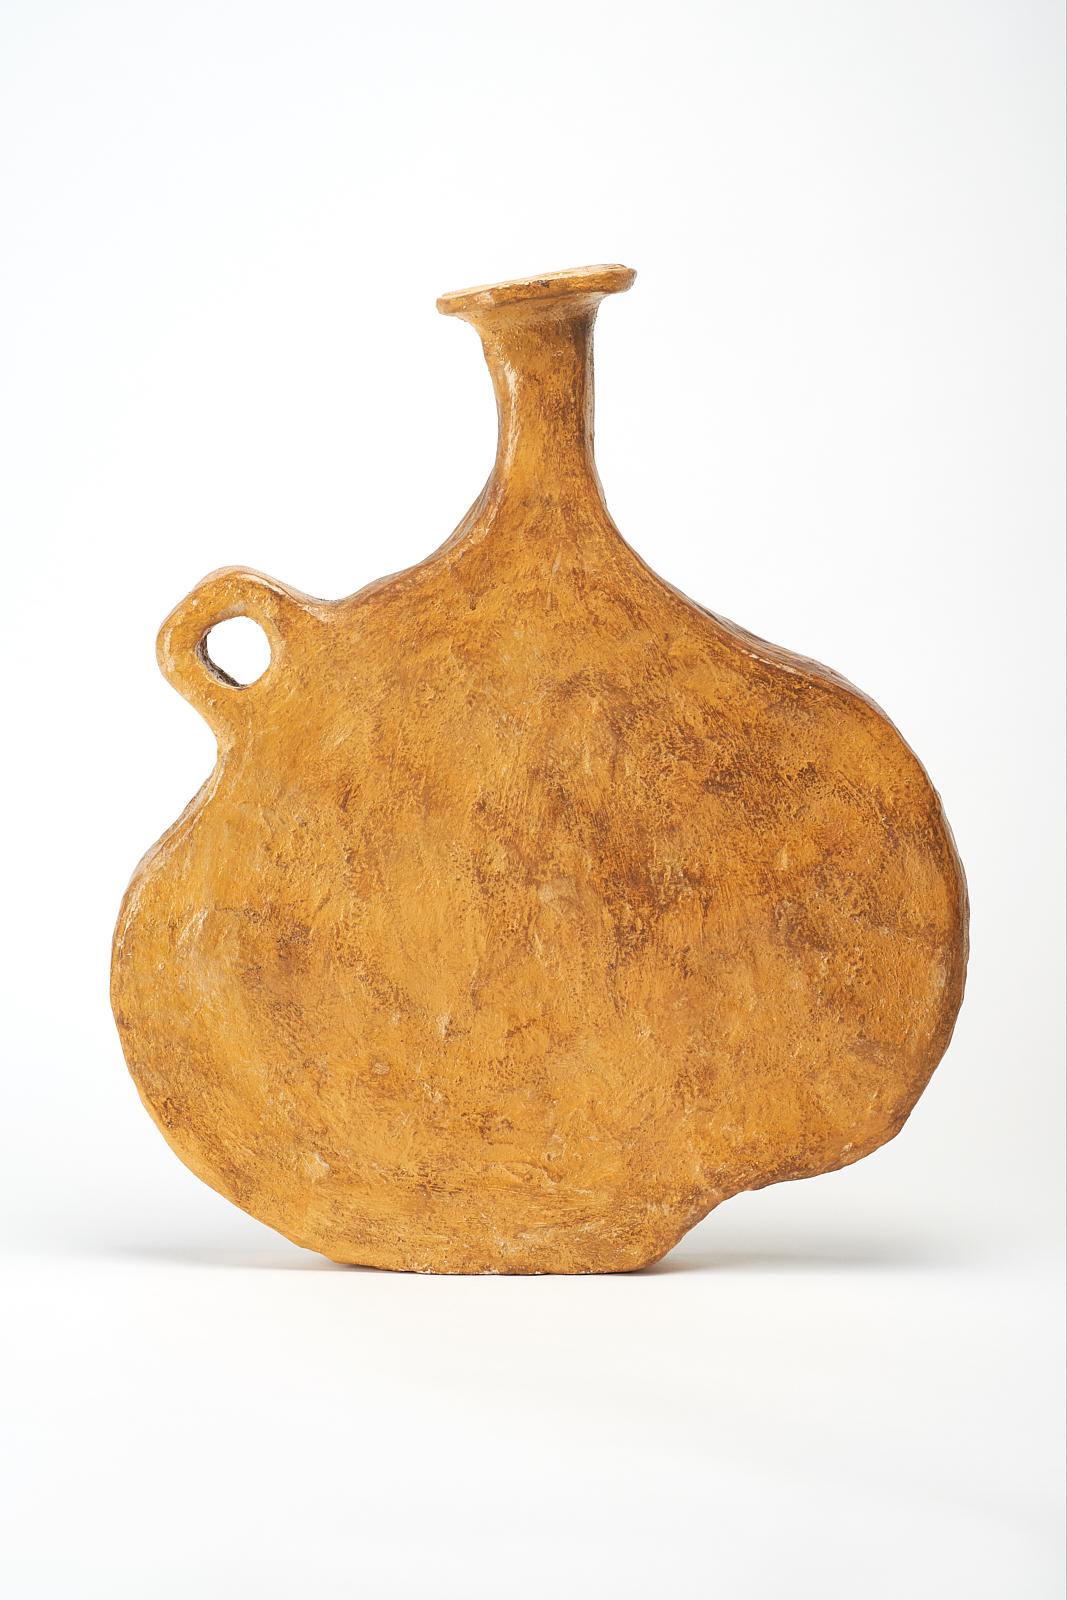 Gamia Vase by Willem Van Hooff
Core Vessel Series
Dimensions: W 42 x H 49 cm (Dimensions may vary as pieces are hand-made and might present slight variations in sizes)
Materials: Earthenware, ceramic, pigments and glaze

Core is a series of flat